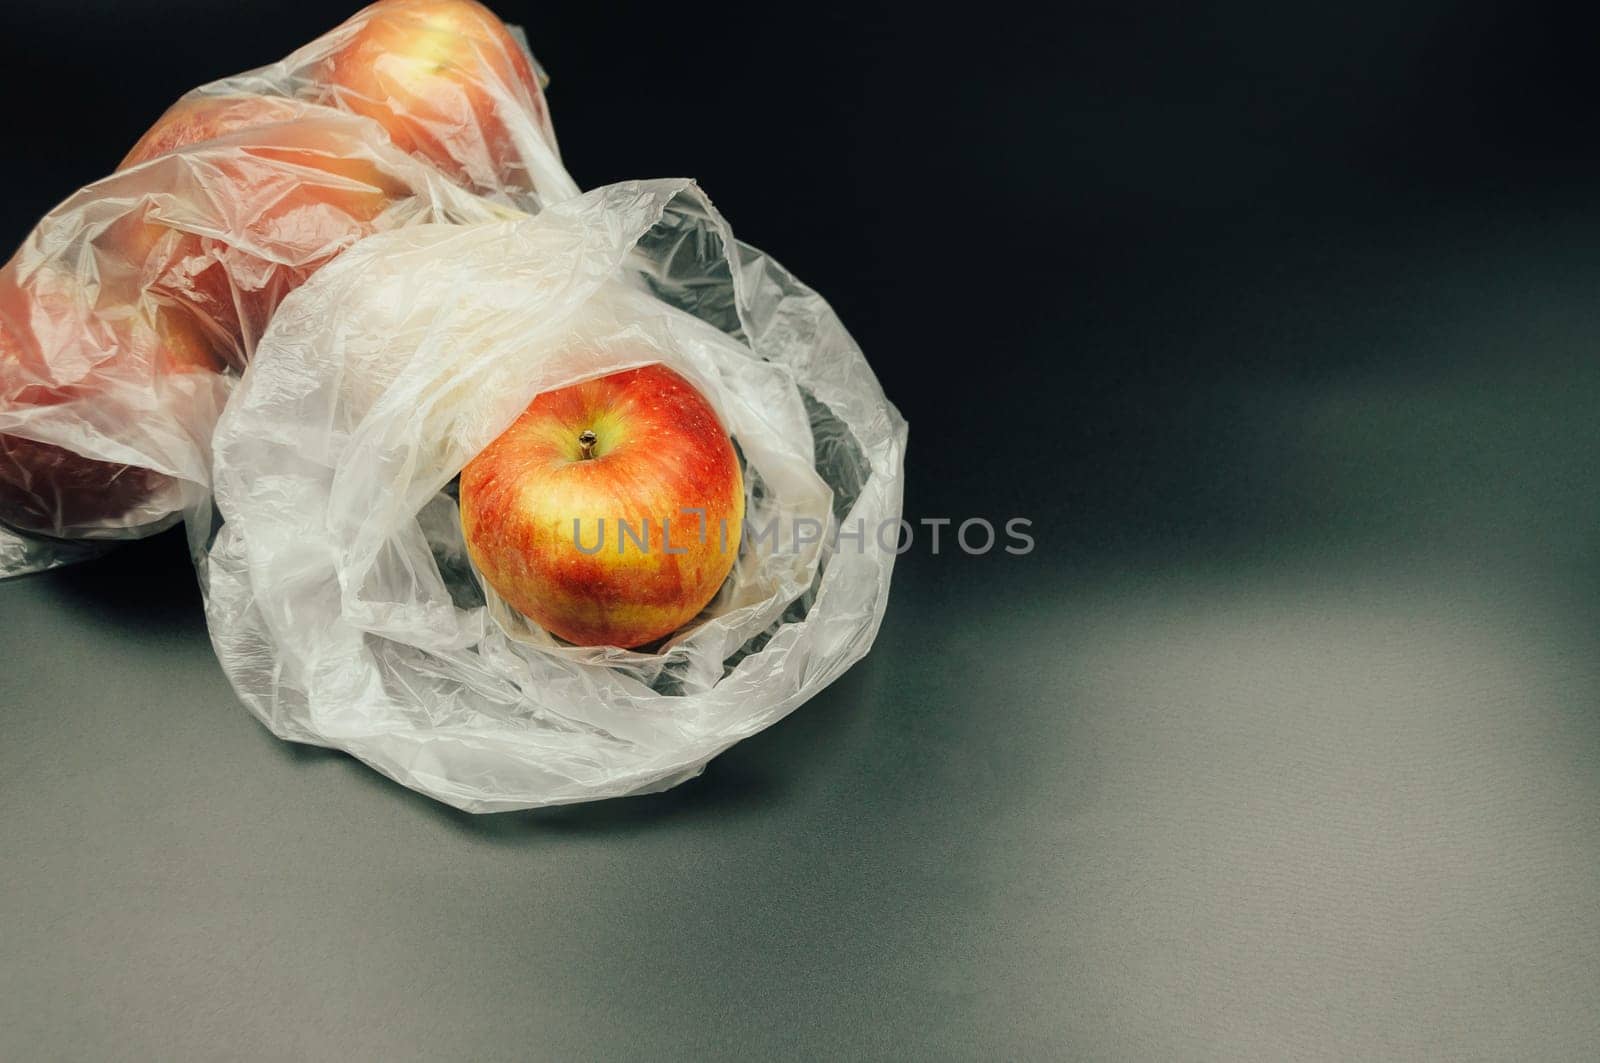 Fresh apples, encased in non-recyclable plastic, highlight the environmental challenges posed by excessive plastic usage, underscoring the need for sustainable alternatives.